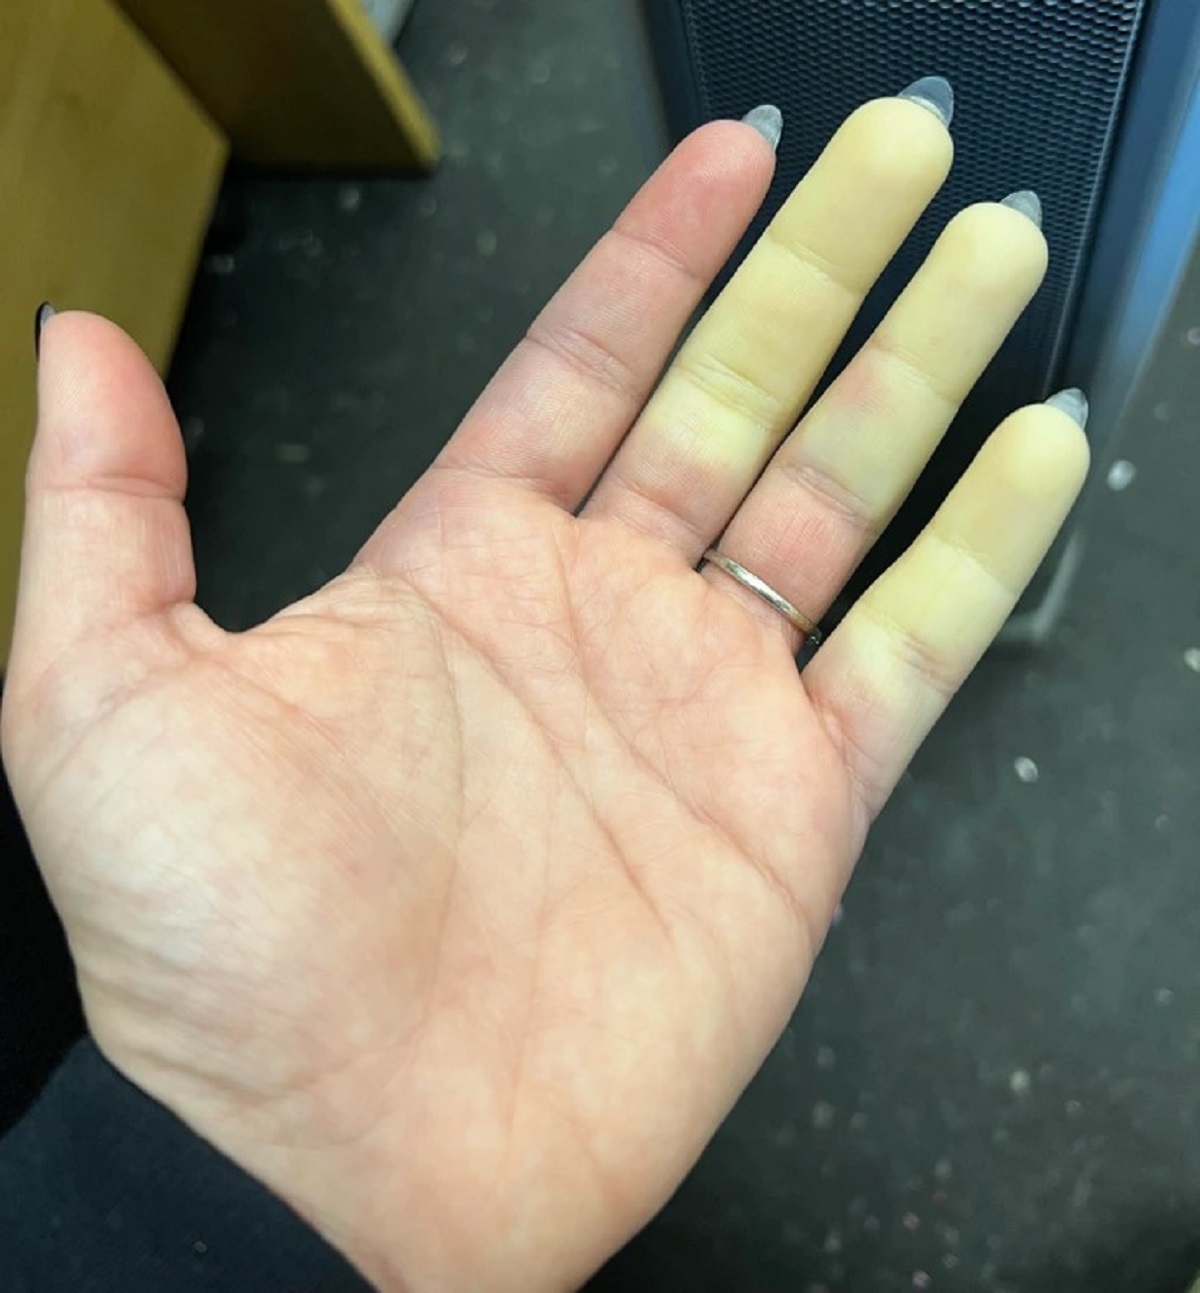 “Raynaud’s syndrome (phenomenon) on my hand this morning”